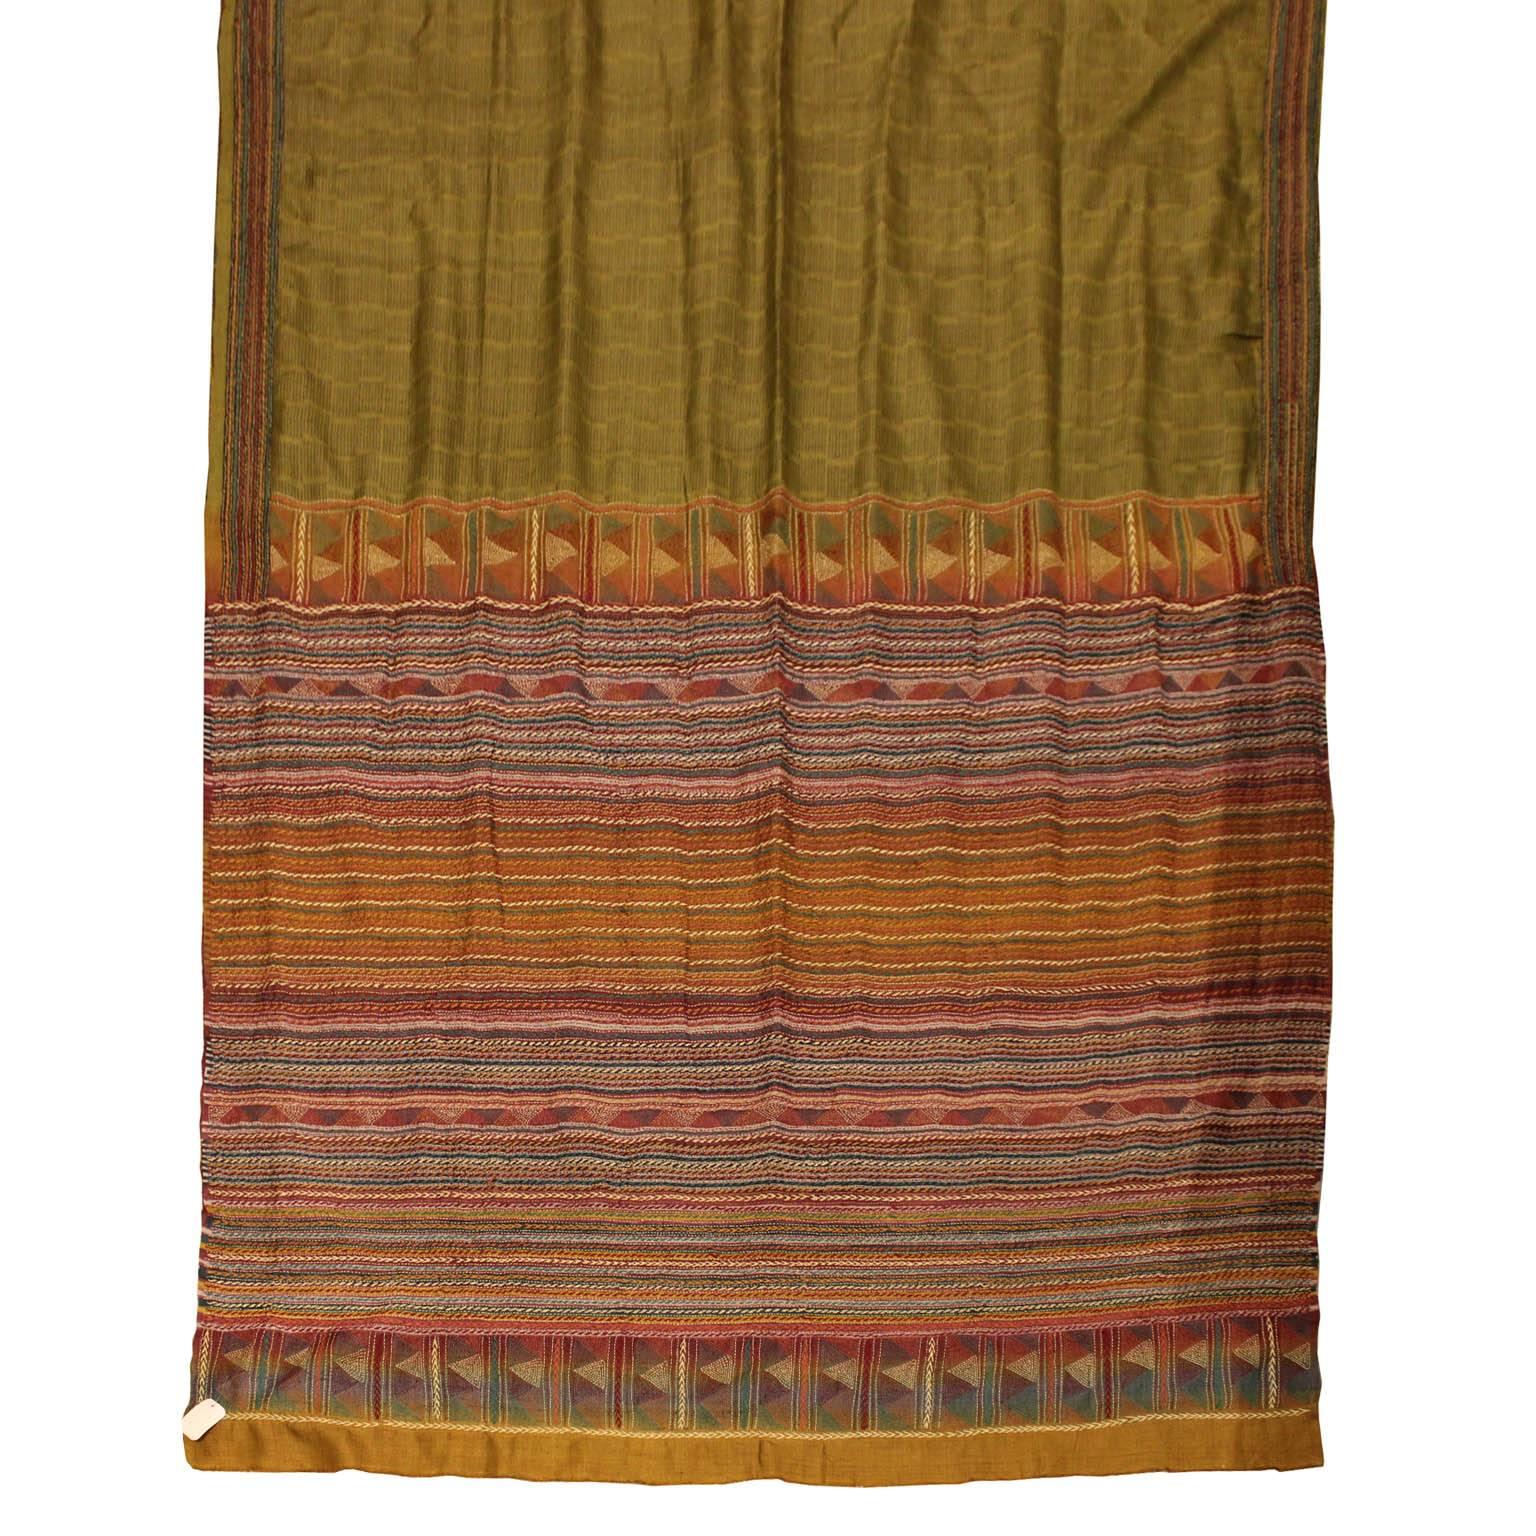 Contemporary olive green silk sari. Exquisitely hand-printed with vegetable dye, hand-stitched with kantha embroidery, a Popular Style from West Bengal, also the oldest form of embroidery. 7 months to produce from start to finish.
One of a kind